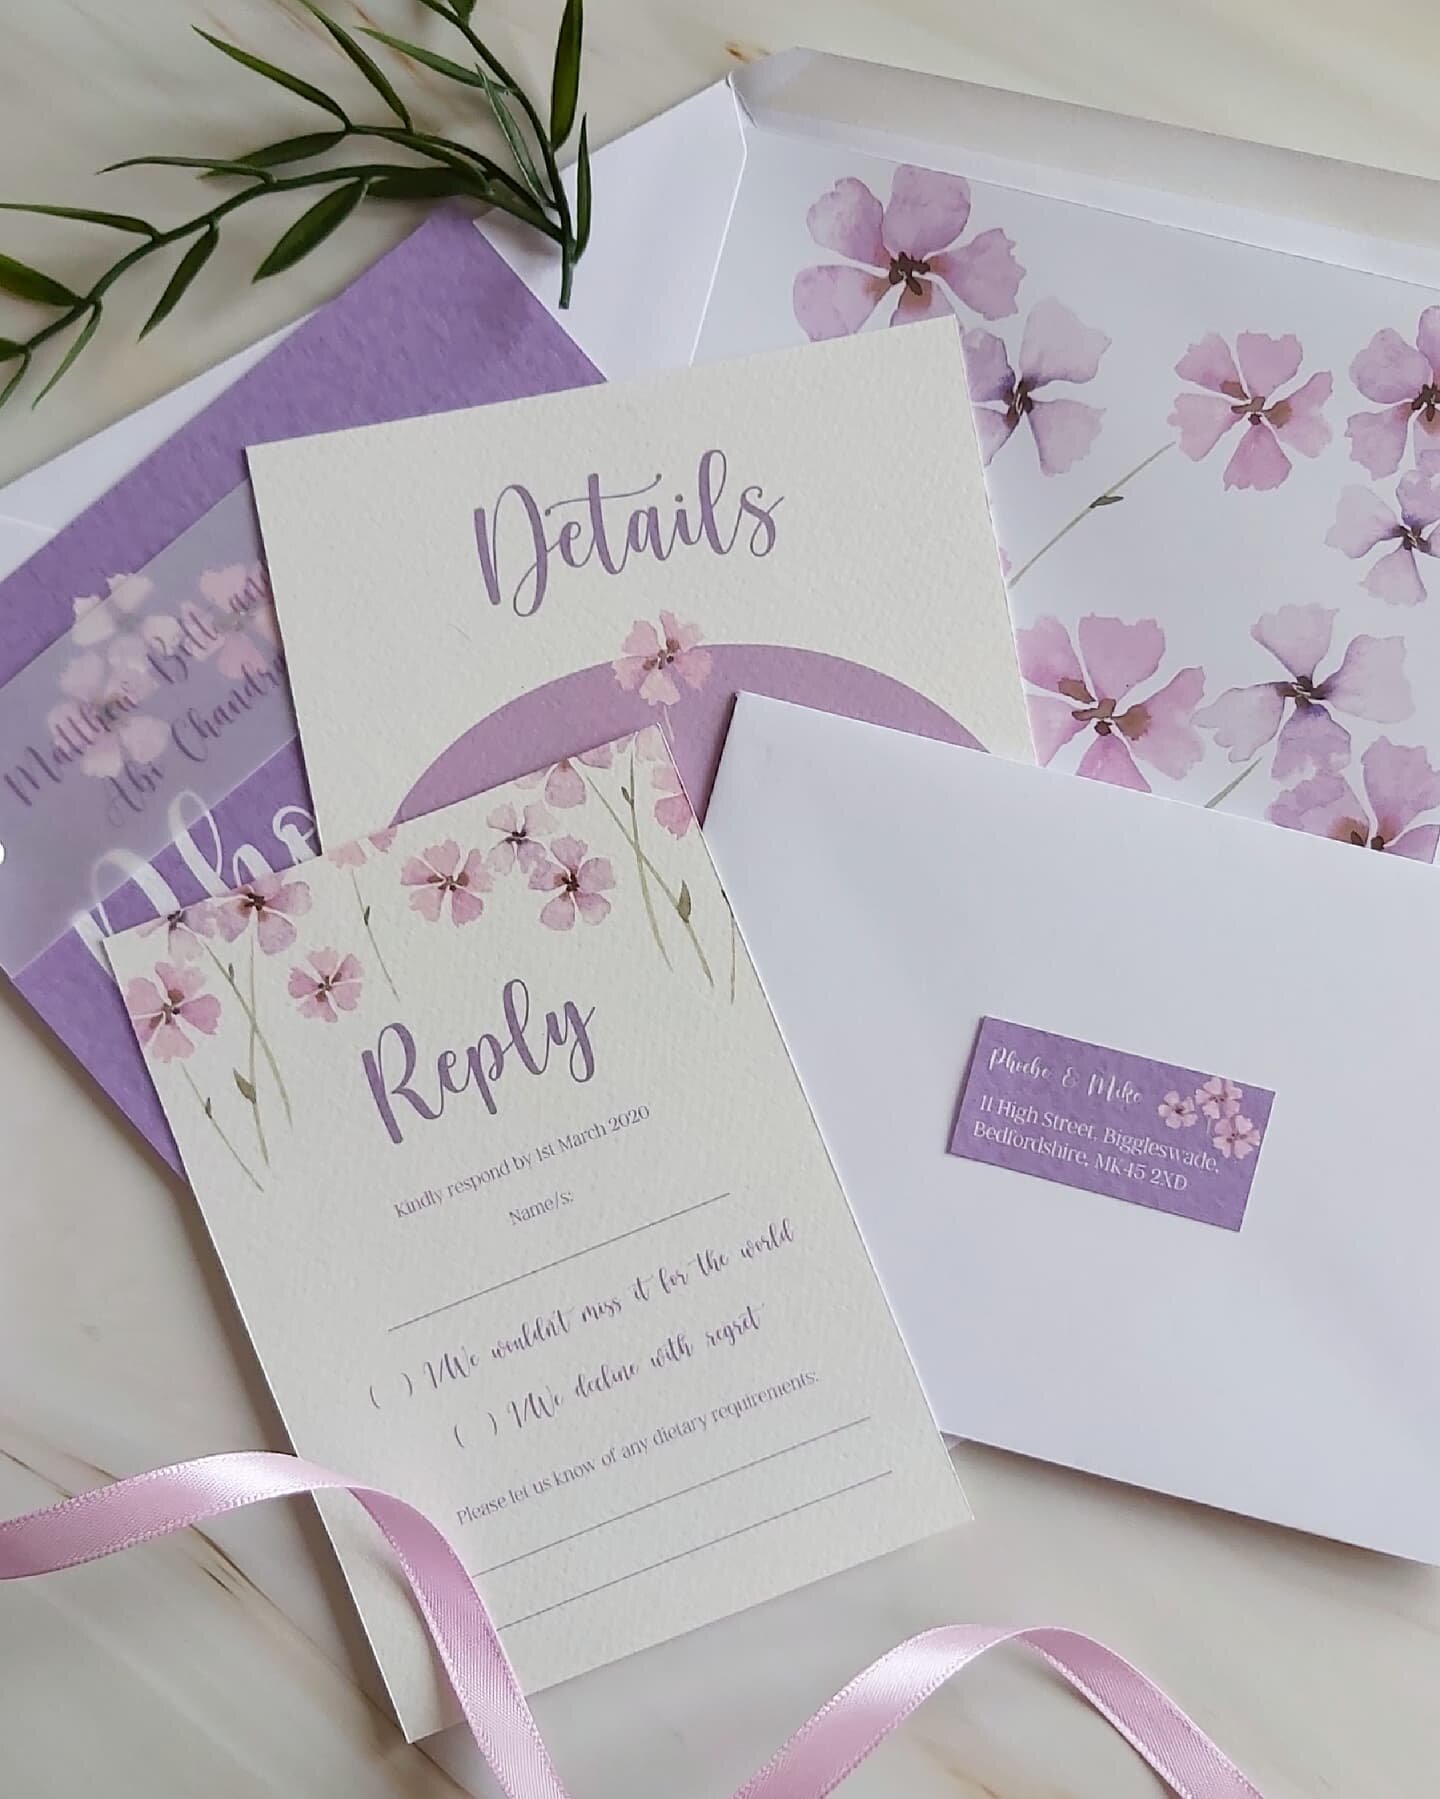 🌿🤍
Who's getting married next Spring/Summer? If that's you then now is the perfect time to start thinking about your invites.
.
Stationers are typically super busy in the autumn/winter months as this is when you need to send out invites for the Spr